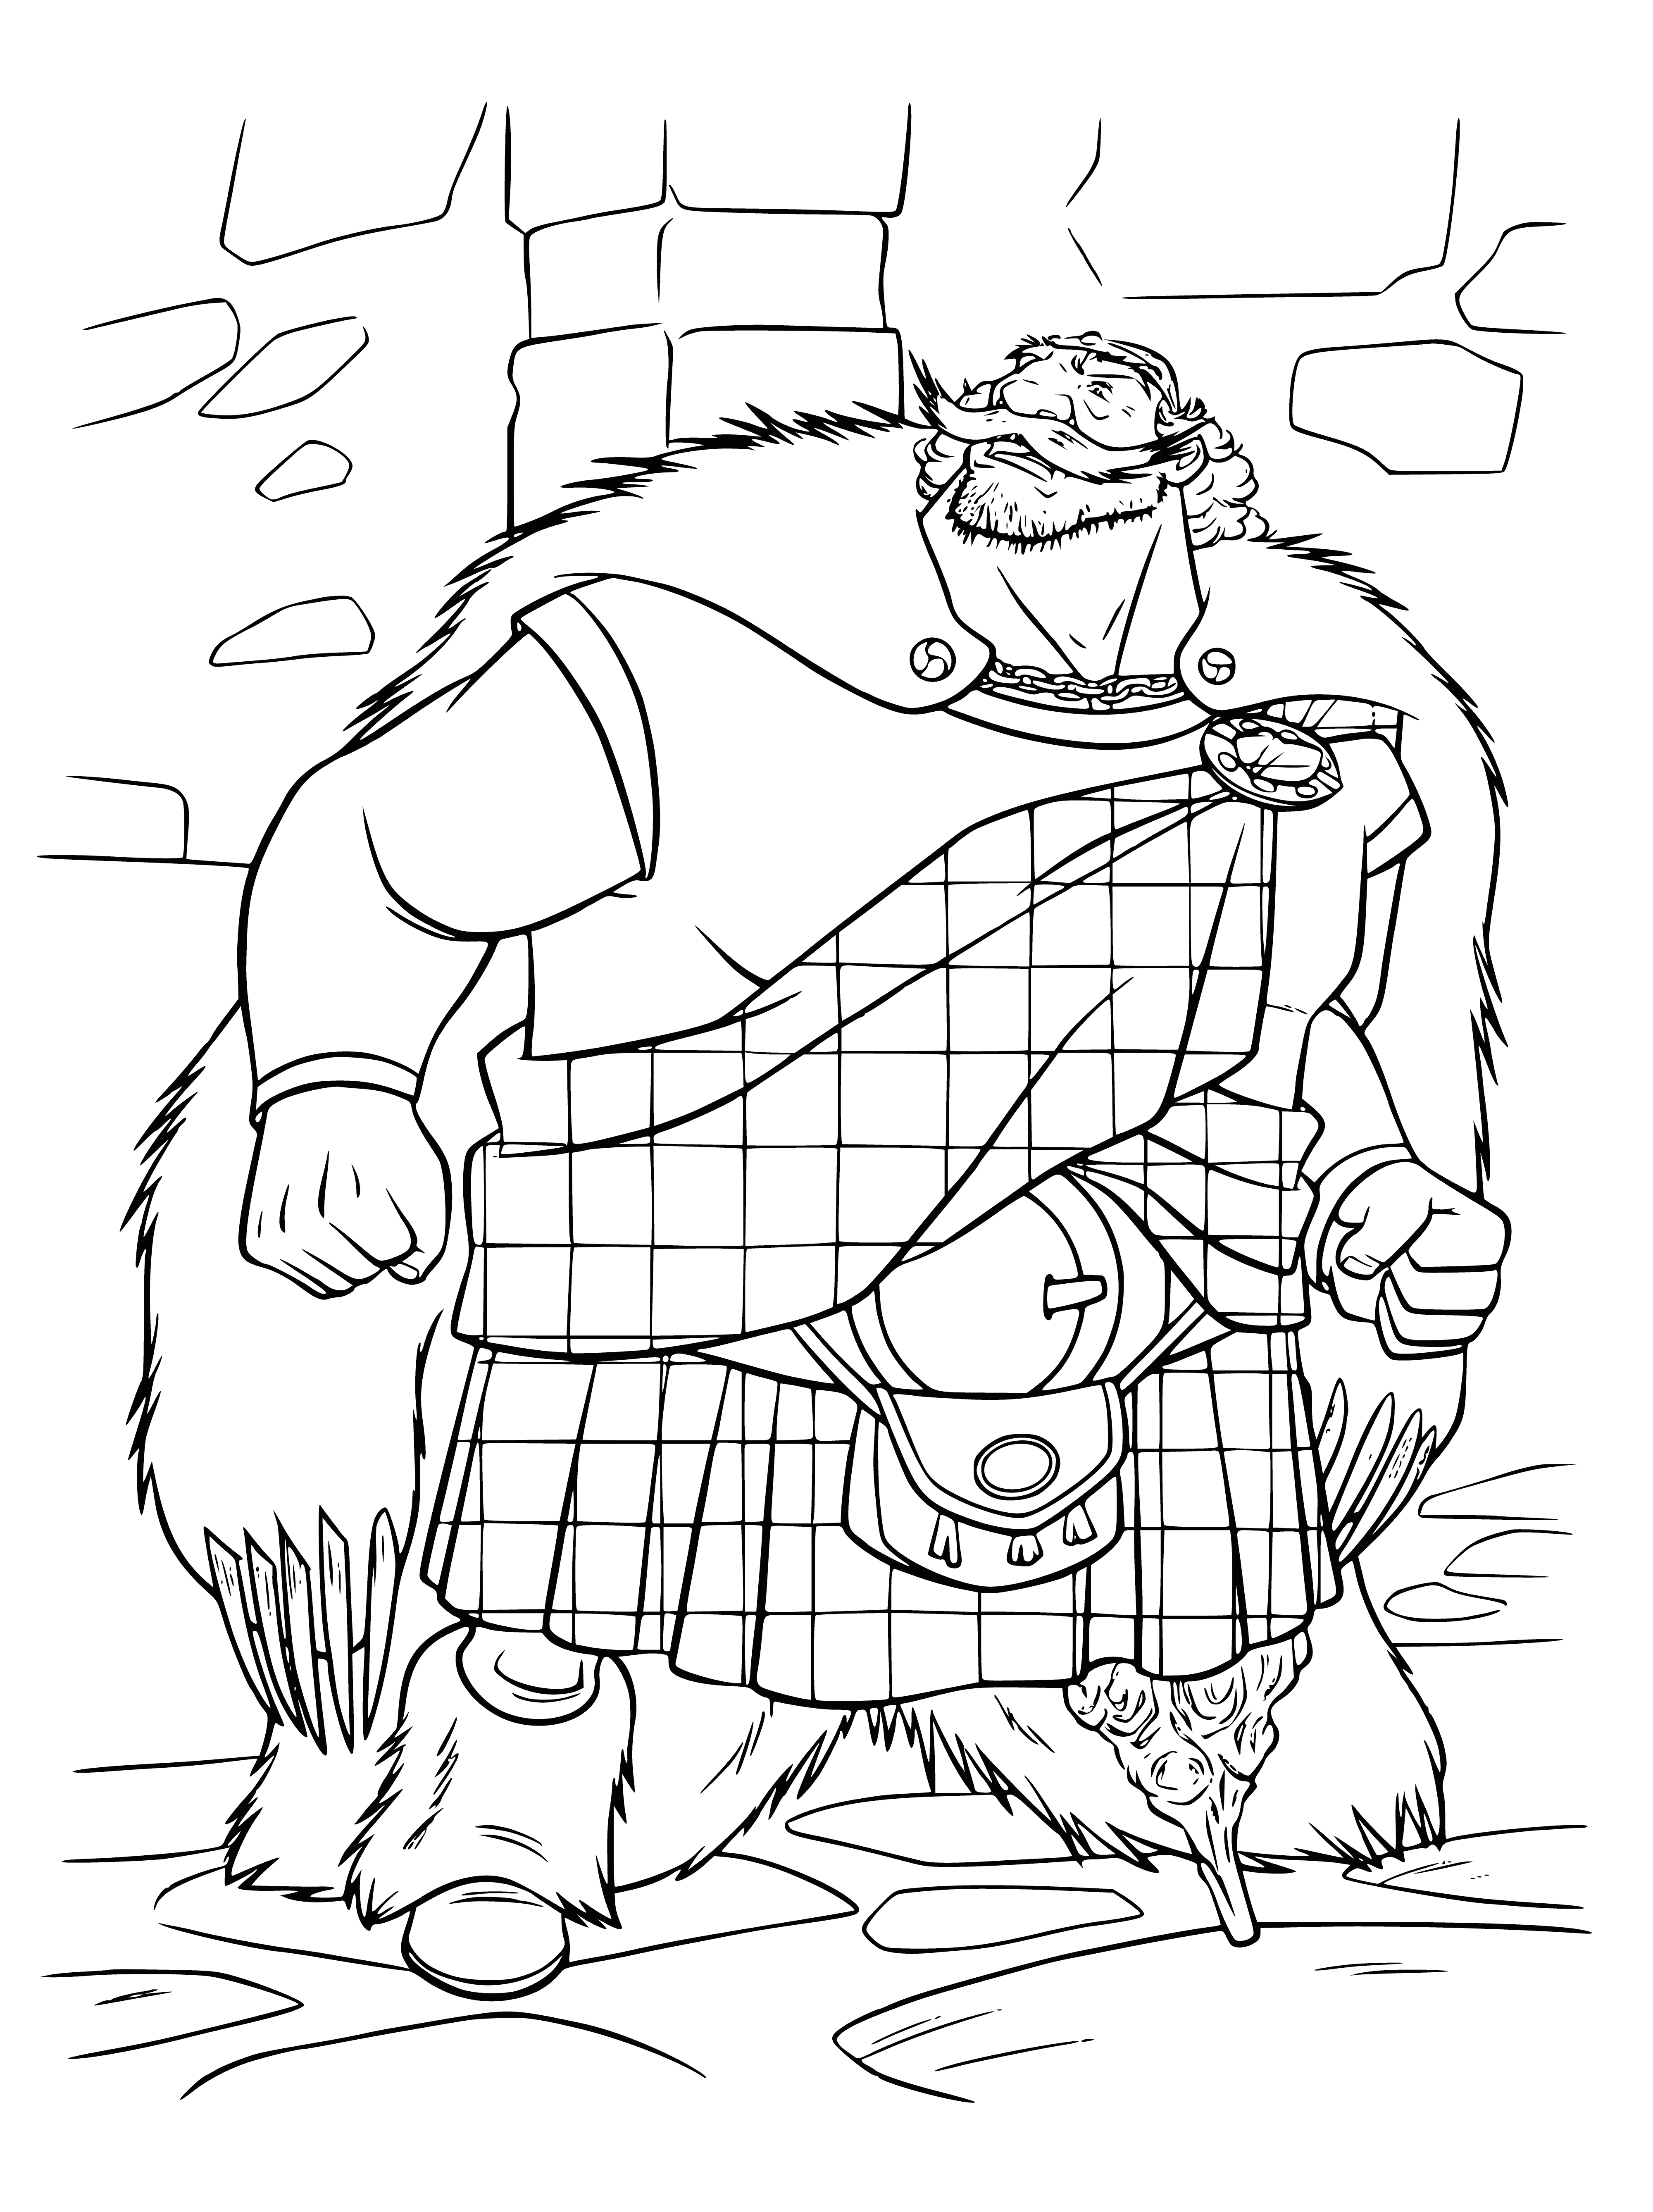 coloring page: A muscular man in a kilt & tunic confidently stares ahead. He holds a large sword & stands before a castle.